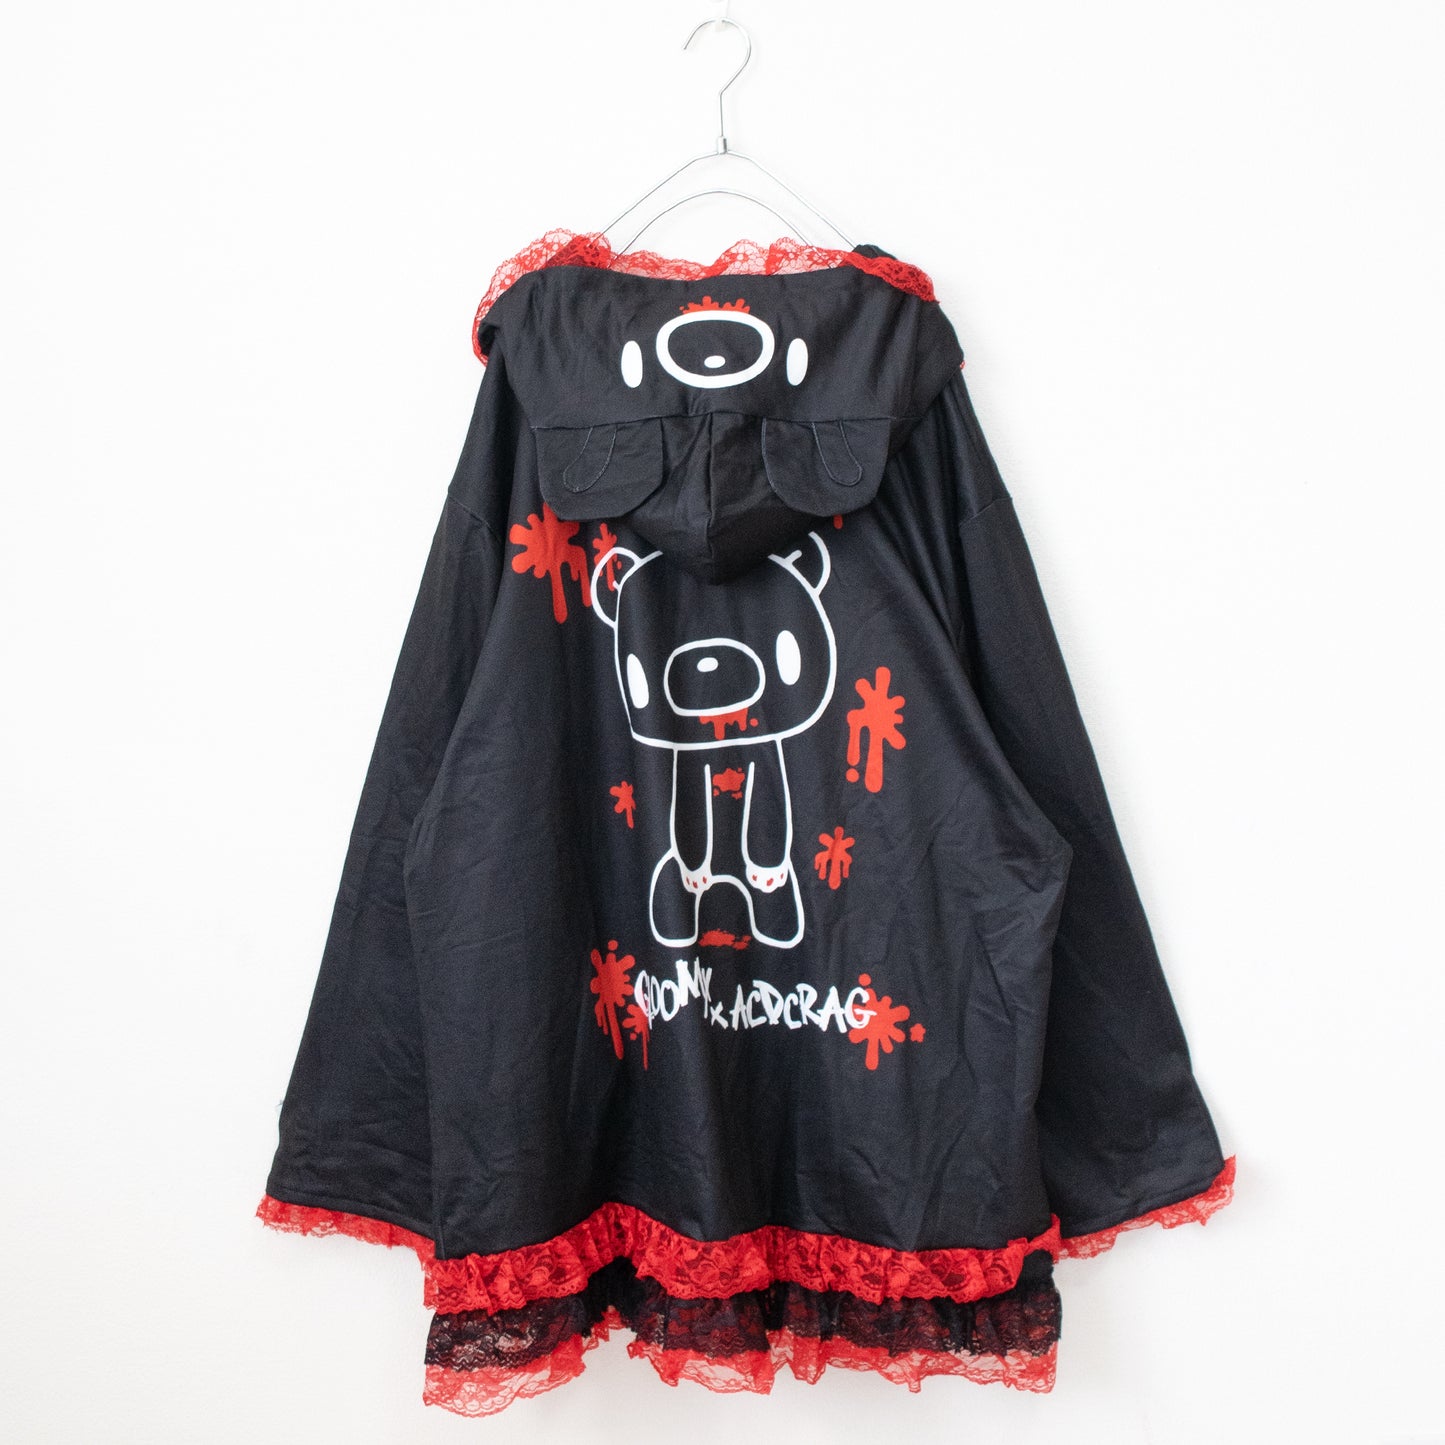 ACDC RAG Dark Gloomy Frill Face Hoodie [Plus size] - YOUAREMYPOISON